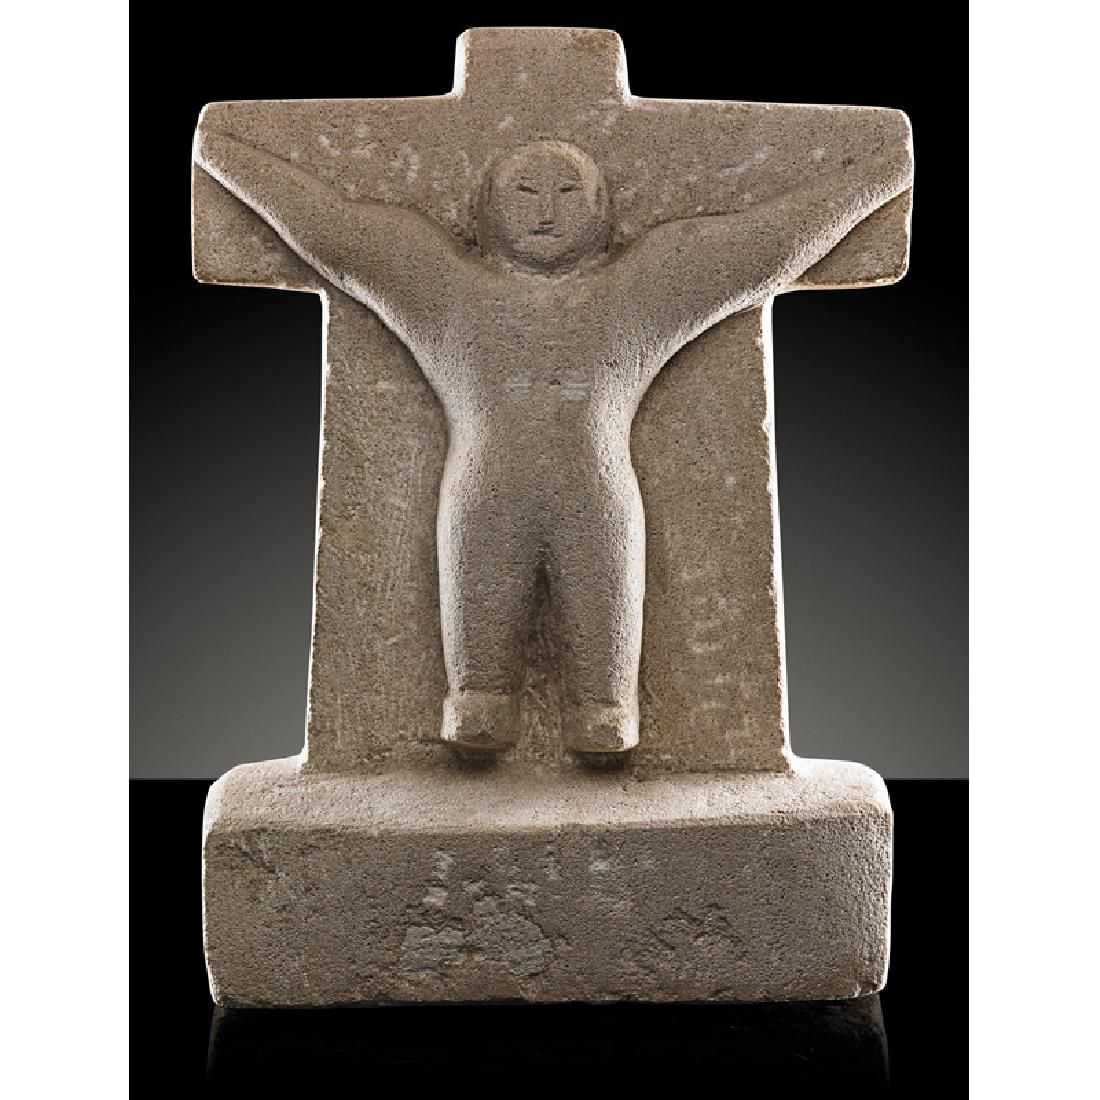 Dating to the 1930s, this William Edmondson carved limestone ‘Crucifixion’ sculpture achieved $140,000 plus the buyer’s premium in October 2018. It is one of several pieces Edmondson made with this theme and this title. Image courtesy of Rago Arts and Auction Center and LiveAuctioneers.